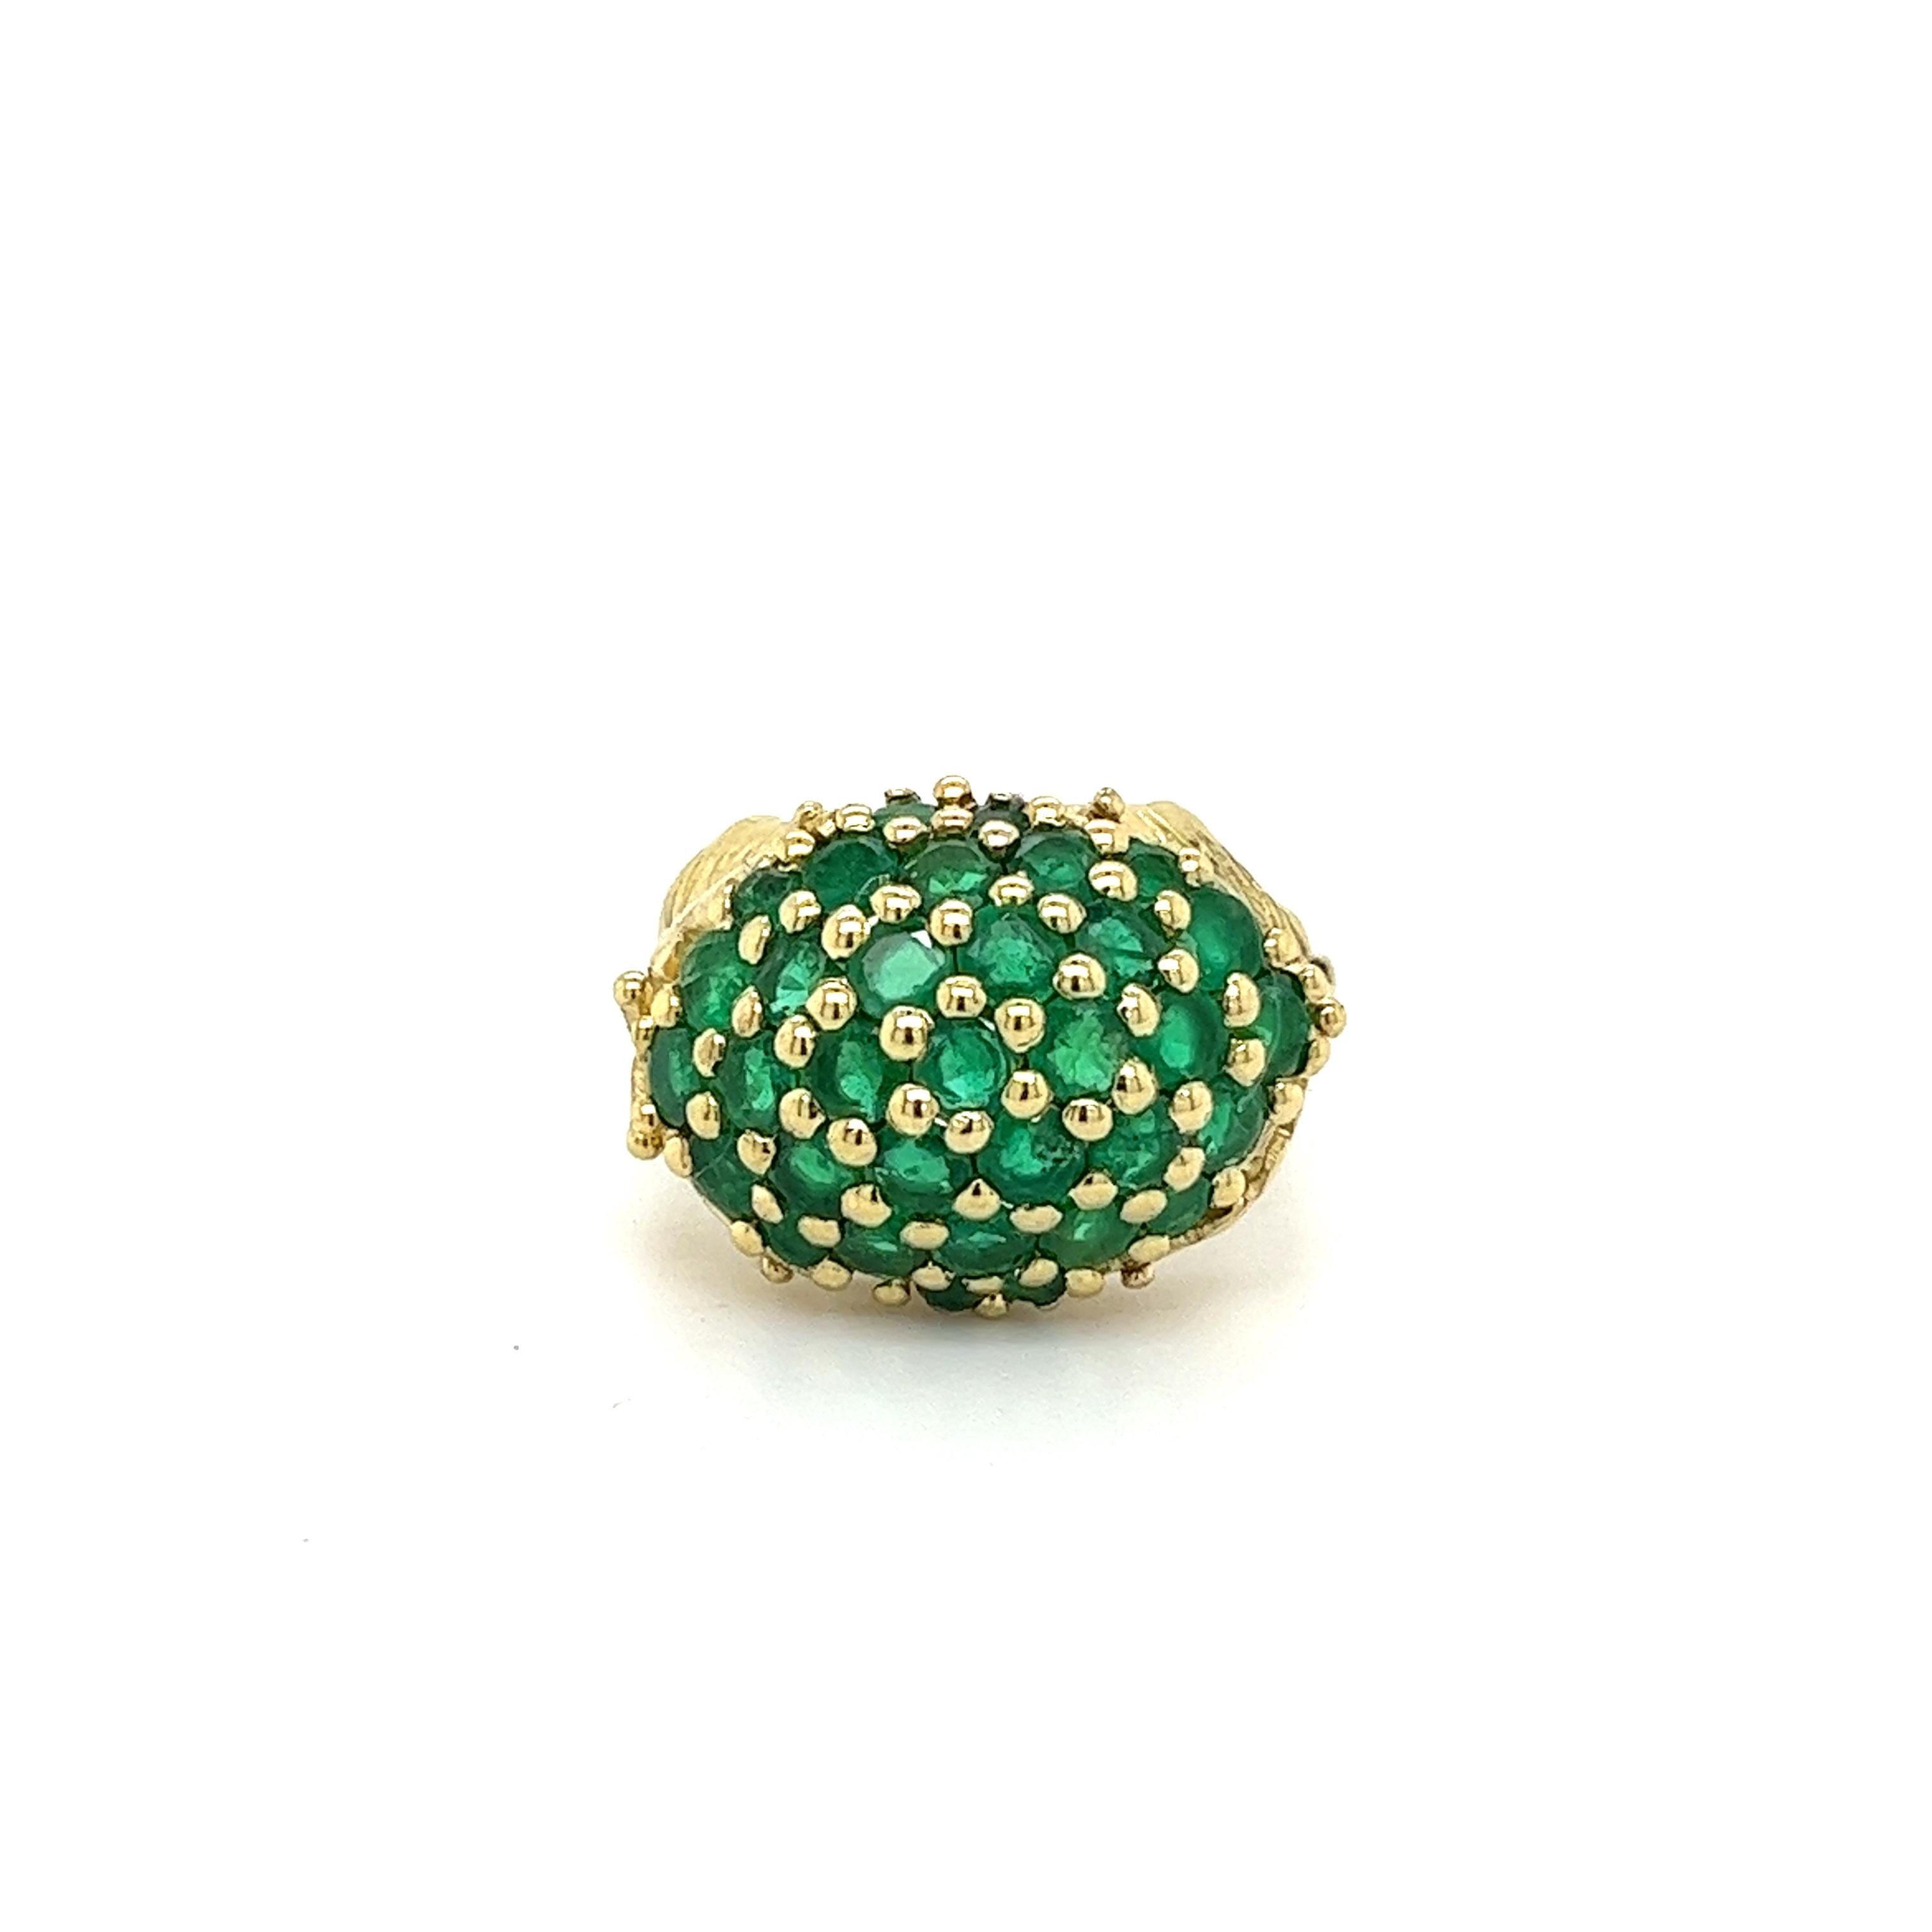 Natural round cut emerald cluster ring with a carved leaf detail is a stunning piece of jewelry that combines classic elegance with a leaf-inspired design. The ring features a cluster of tensions set emerald gemstones set in a circular dome